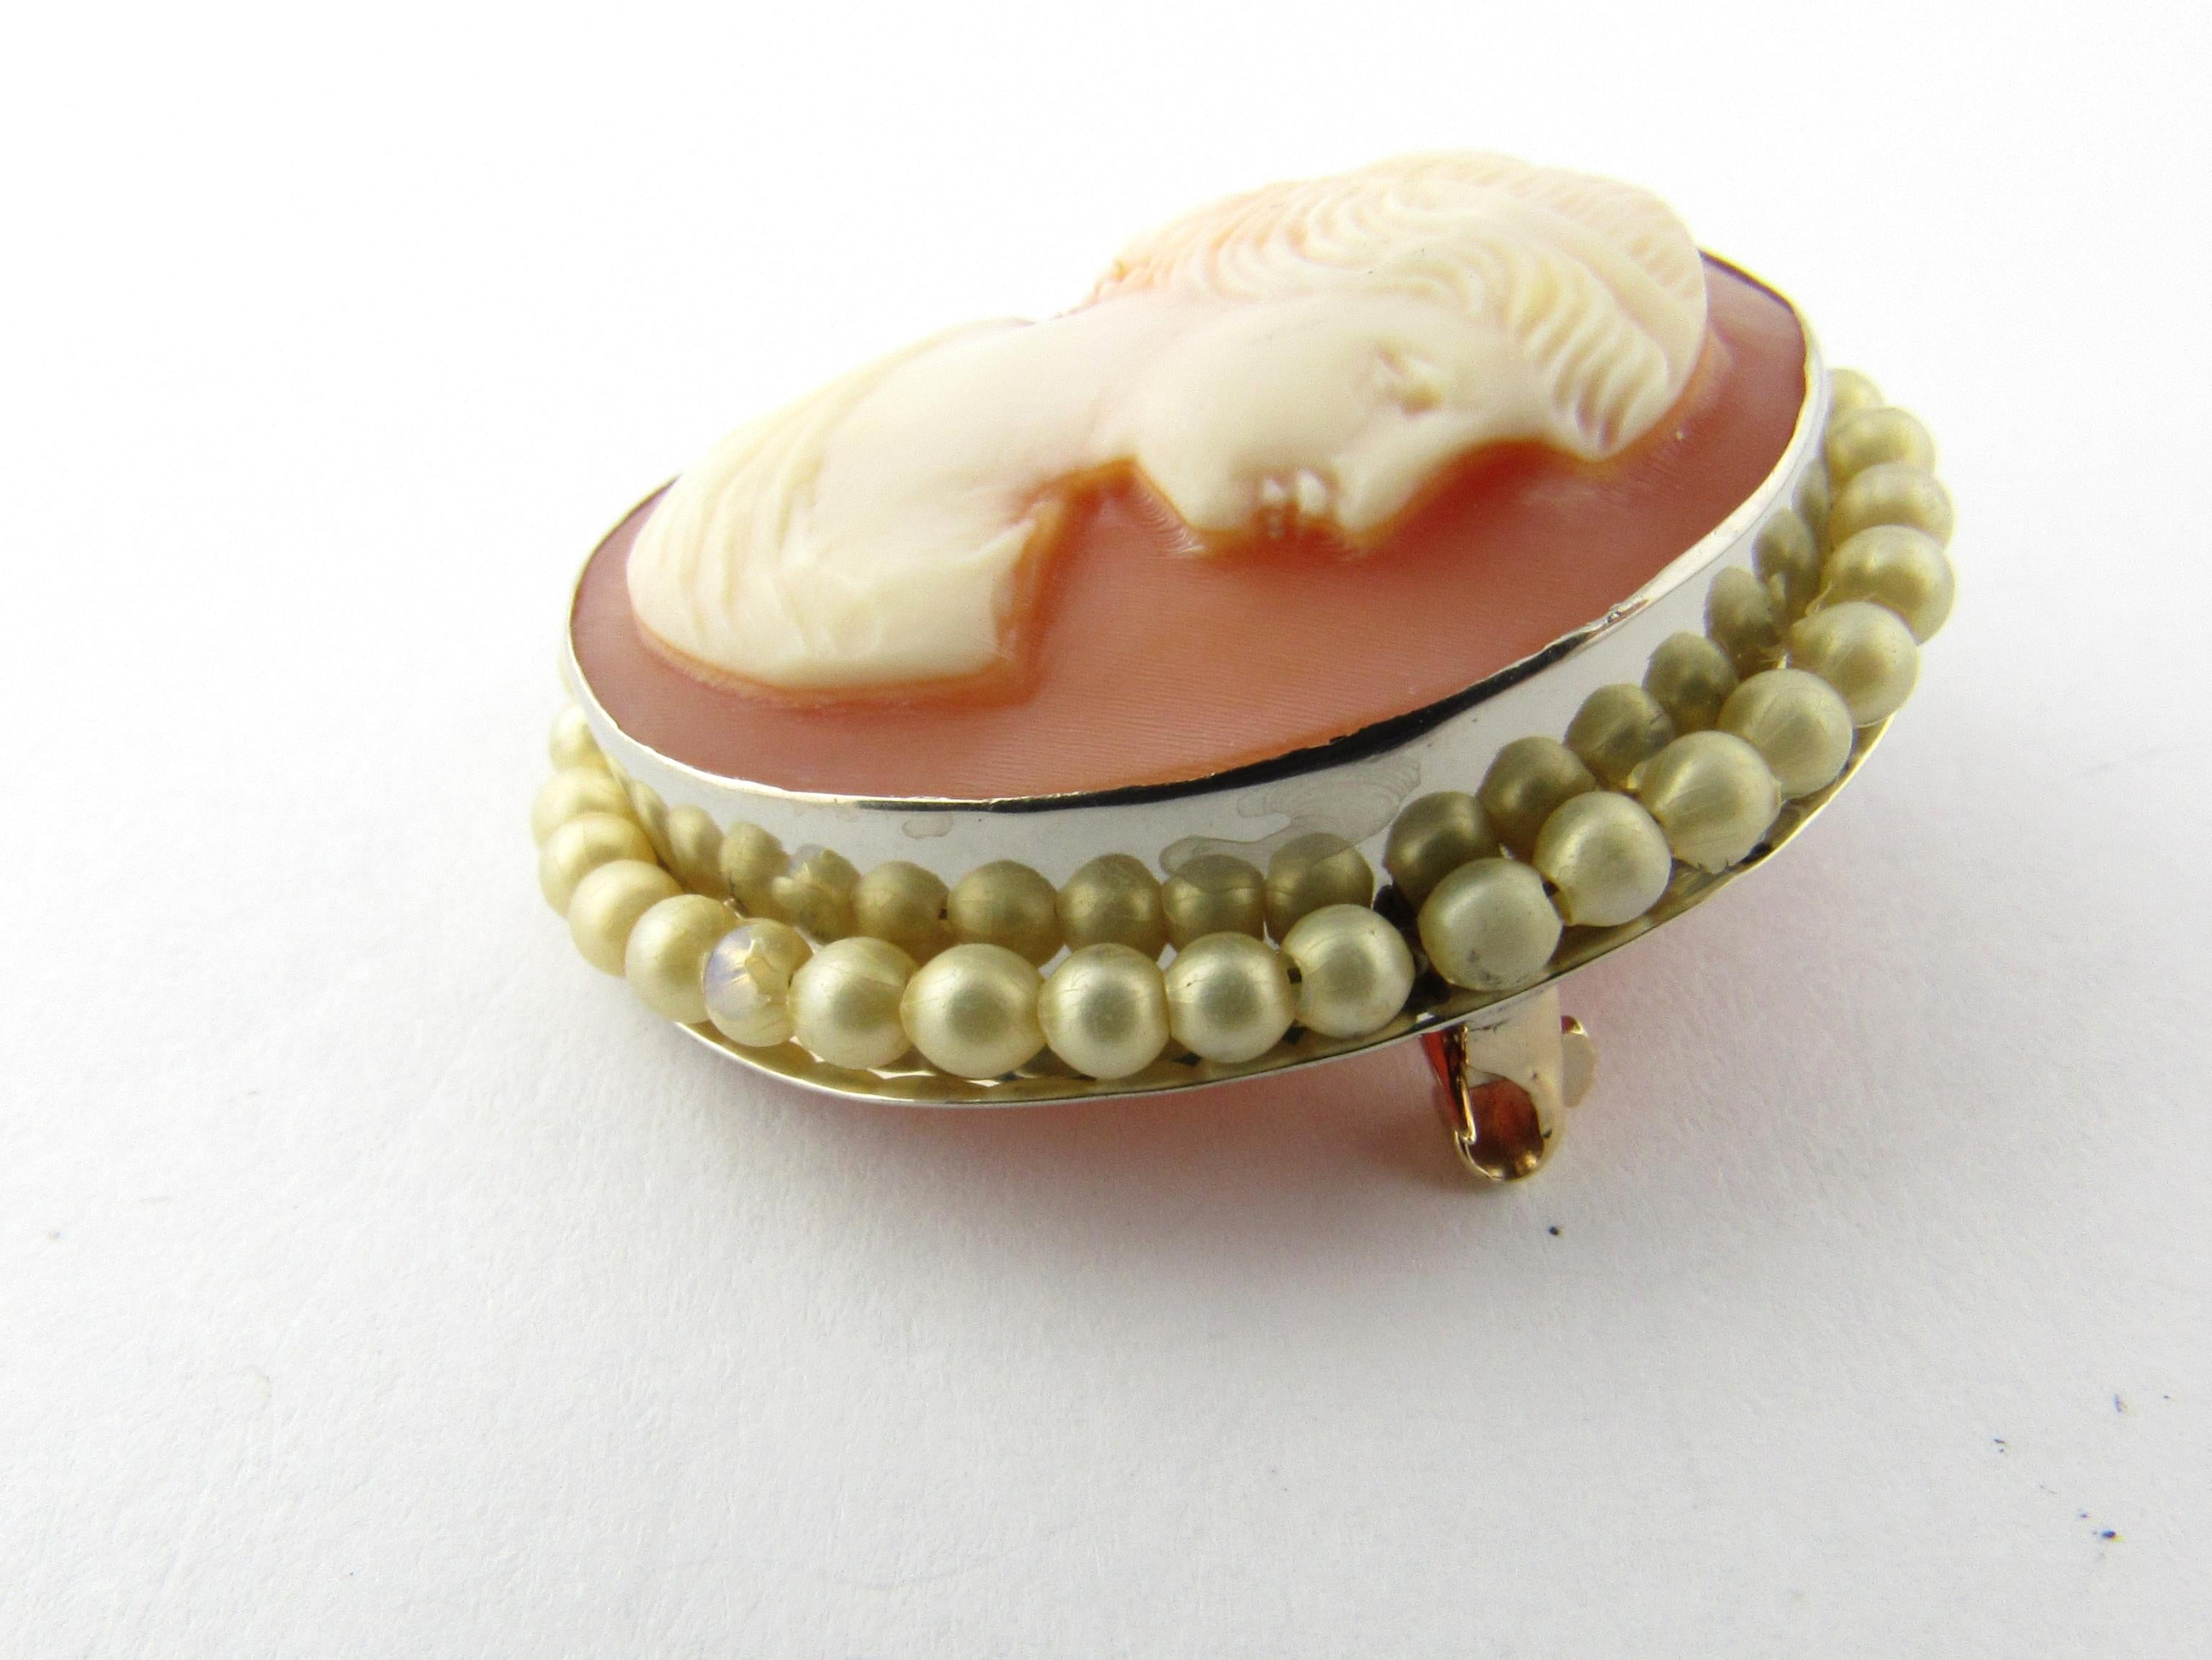 14 Karat Yellow Gold Cameo Pendant/Brooch-

This lovely cameo brooch features a beautiful lady in profile detailed with a stunning frame of seed pearls.  Can be worn as a pendant or a brooch.

Size:  29 mm x  24 mm 

Weight: 3.6 dwt. /  5.7 gr.